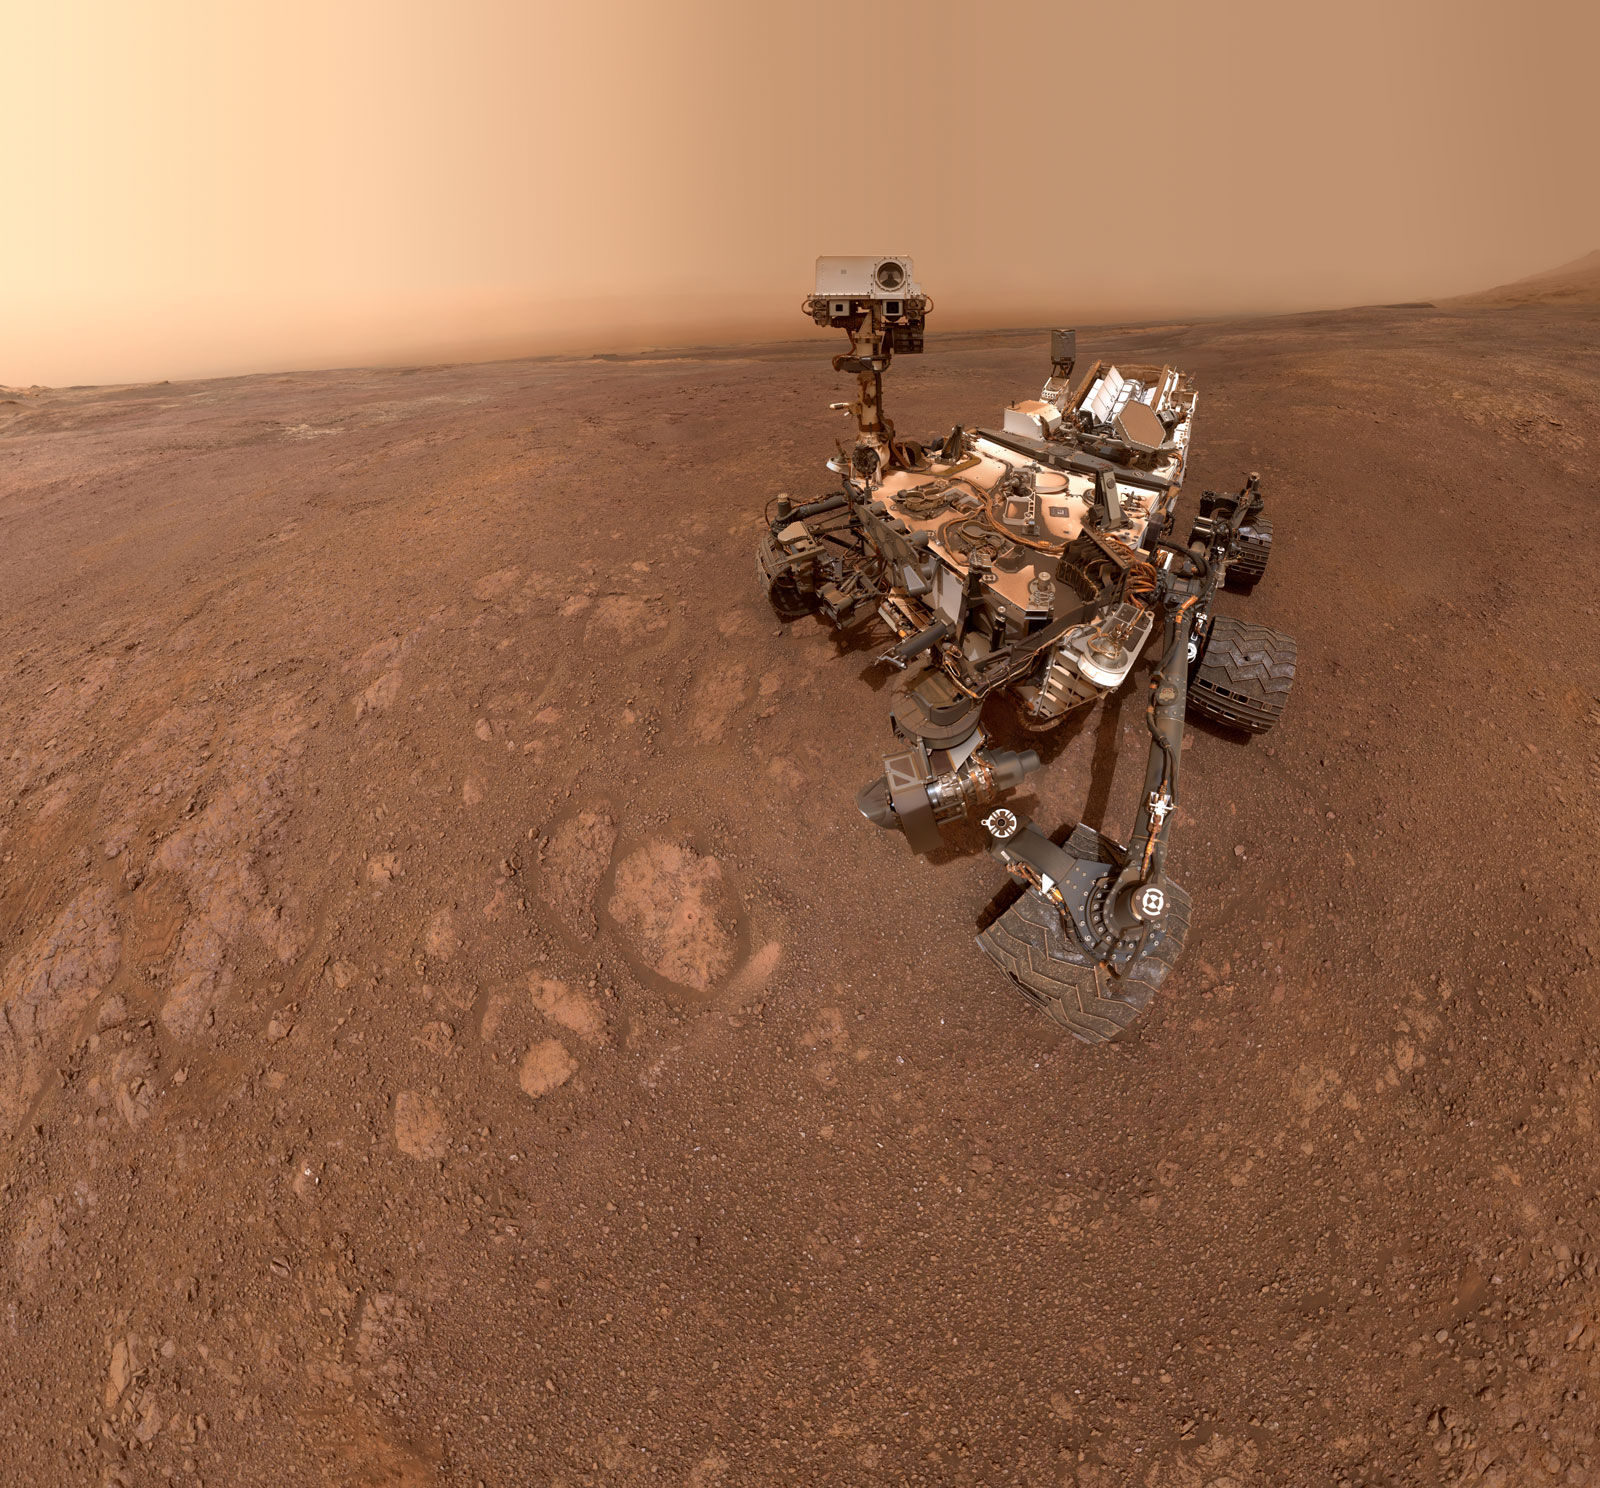 A selfie taken by NASA's Curiosity Mars rover on Sol 2291 (January 15) at the "Rock Hall" drill site, located on Vera Rubin Ridge.